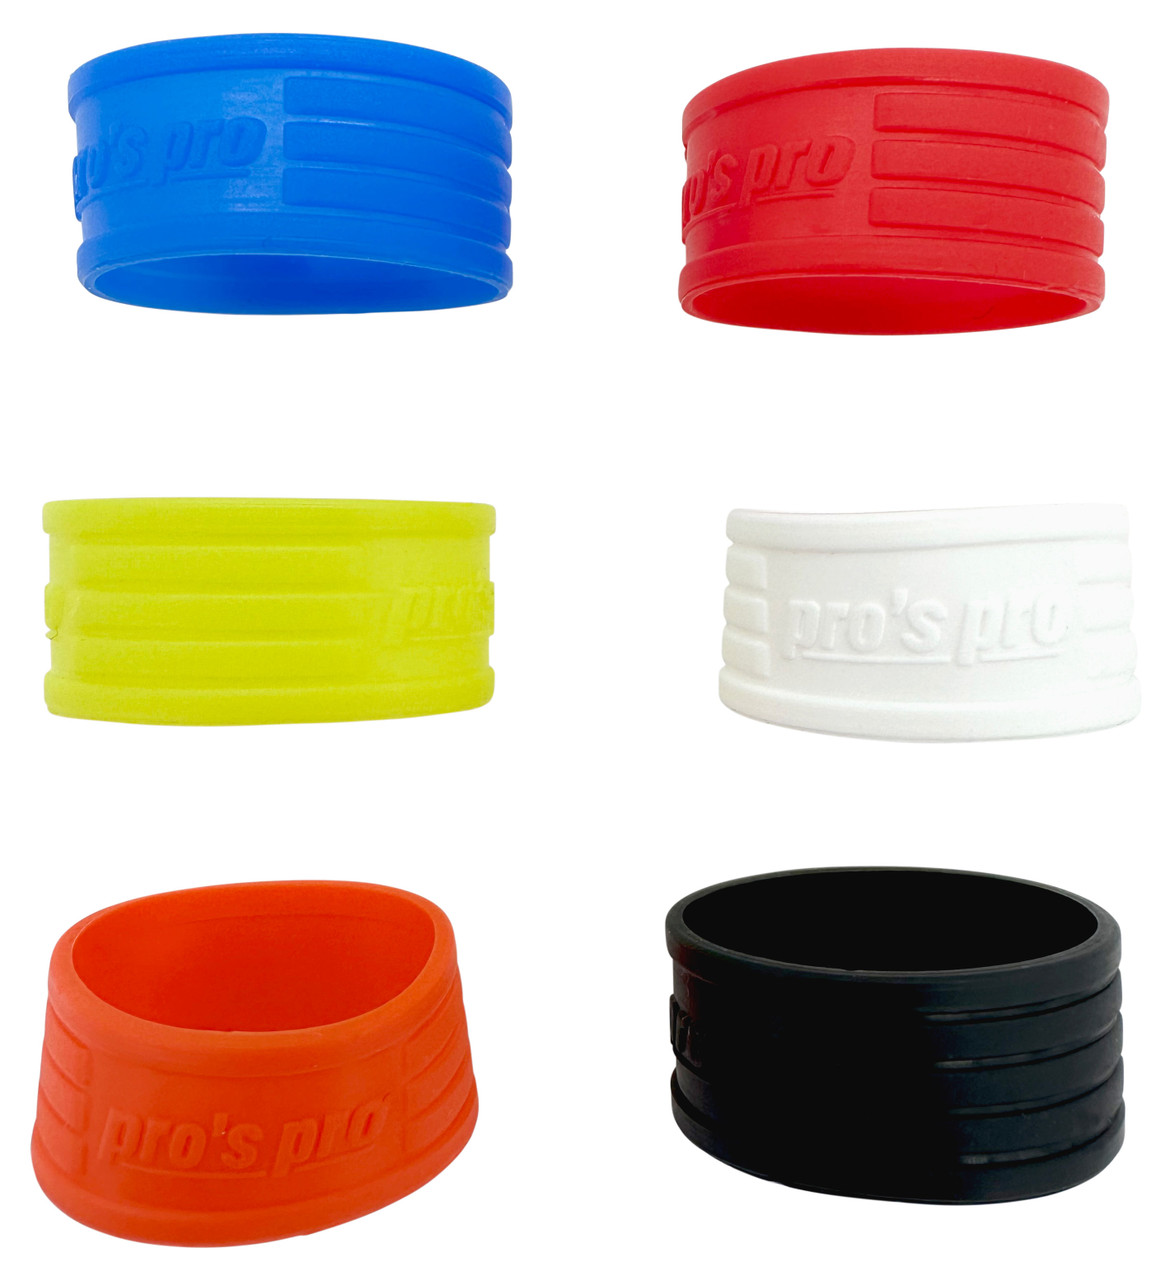 Tennis Grip Ring - V1060M - IdeaStage Promotional Products